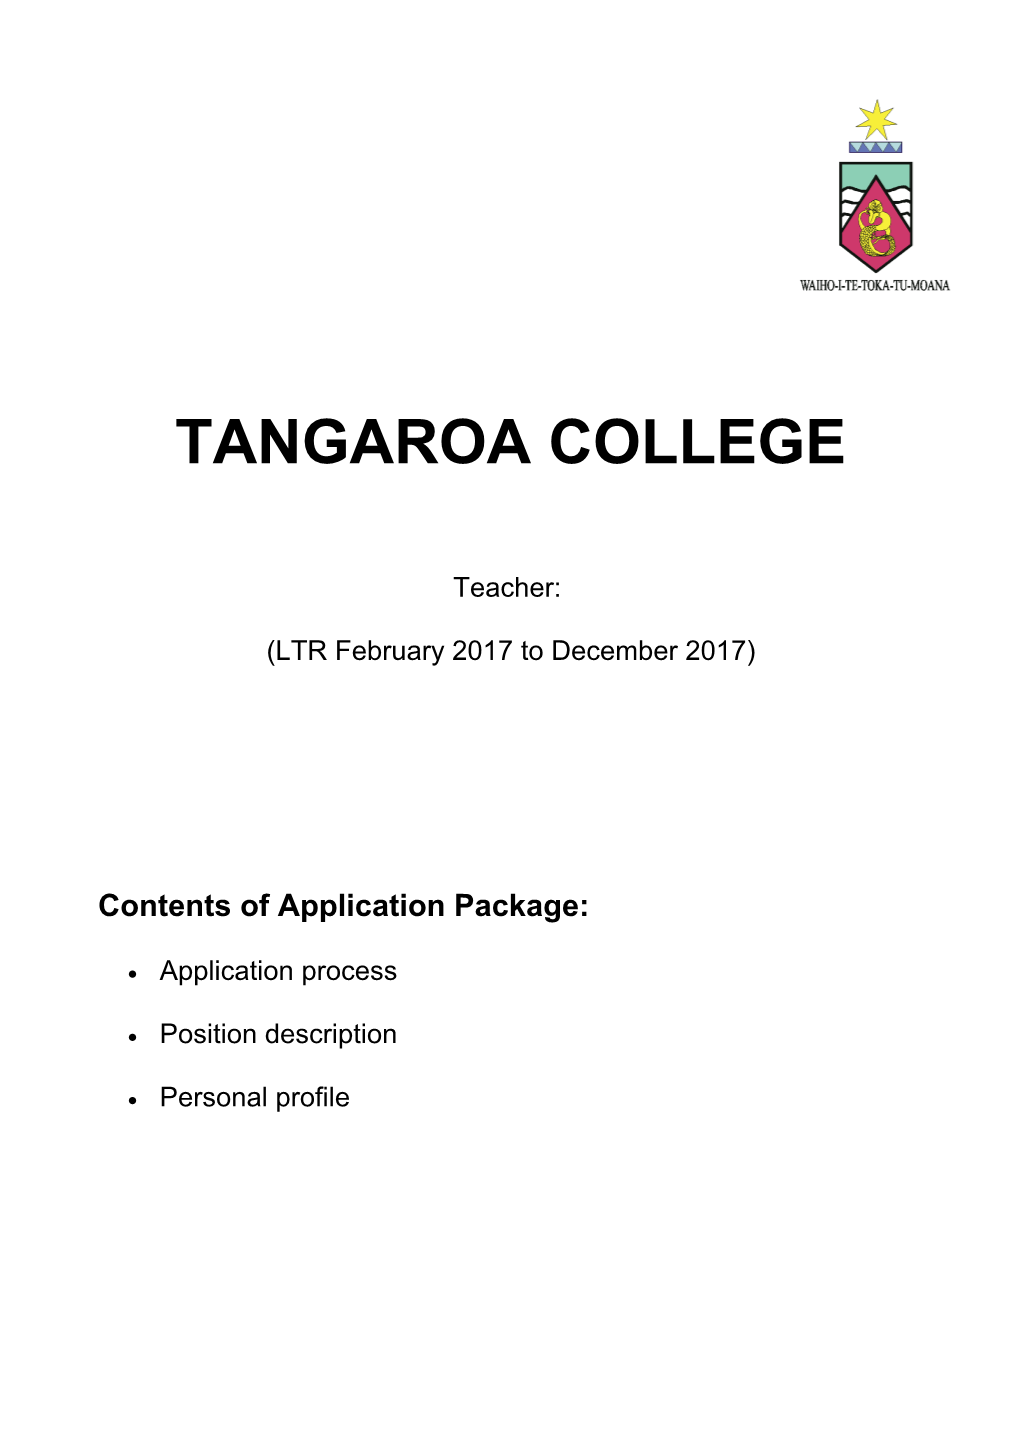 Contents of Application Package